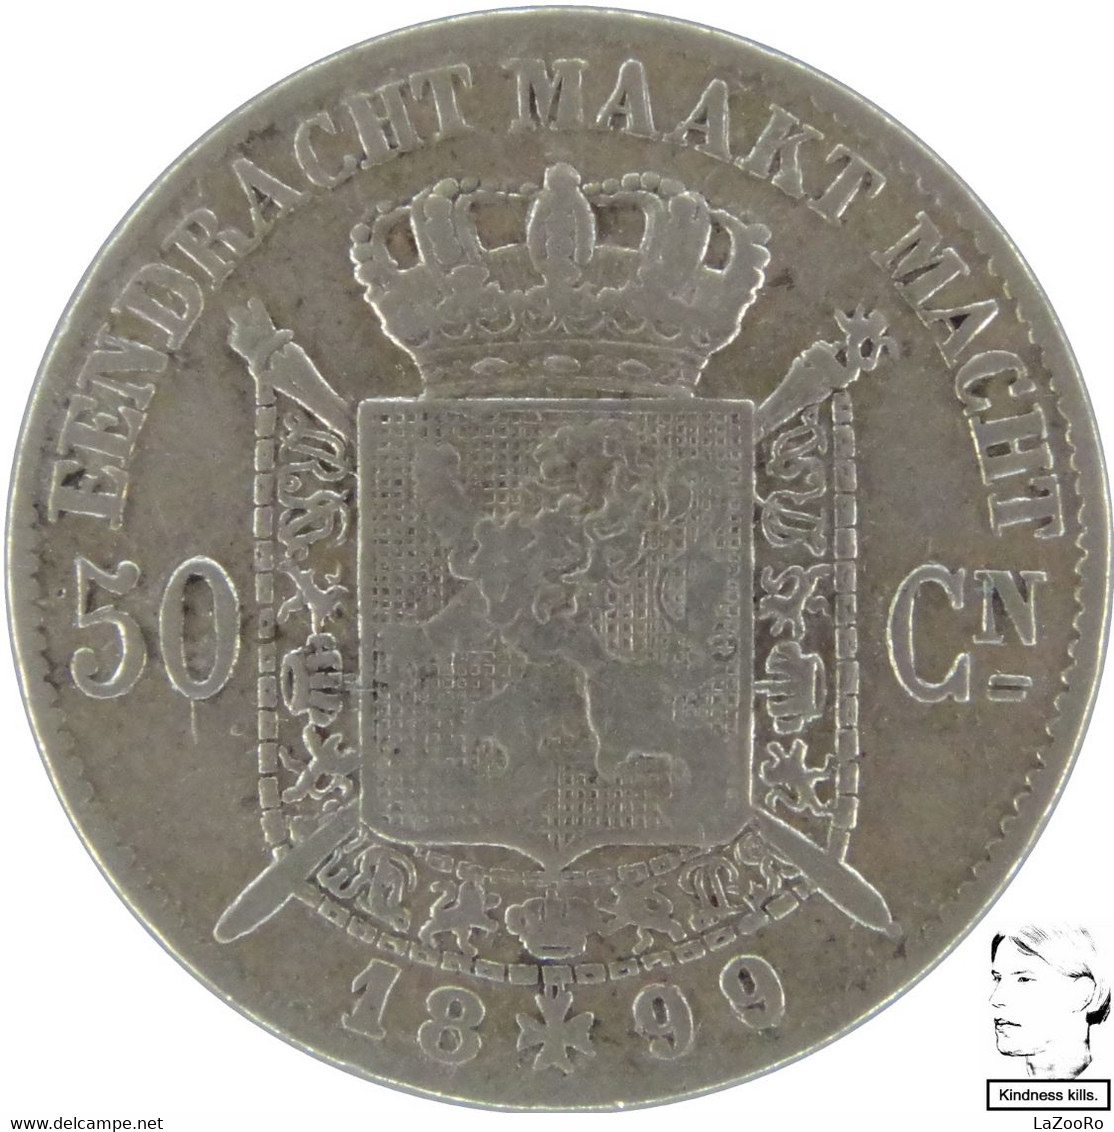 LaZooRo: Belgium 50 Centimes 1899/86 VF / XF Not In Krause - Silver - 50 Cents